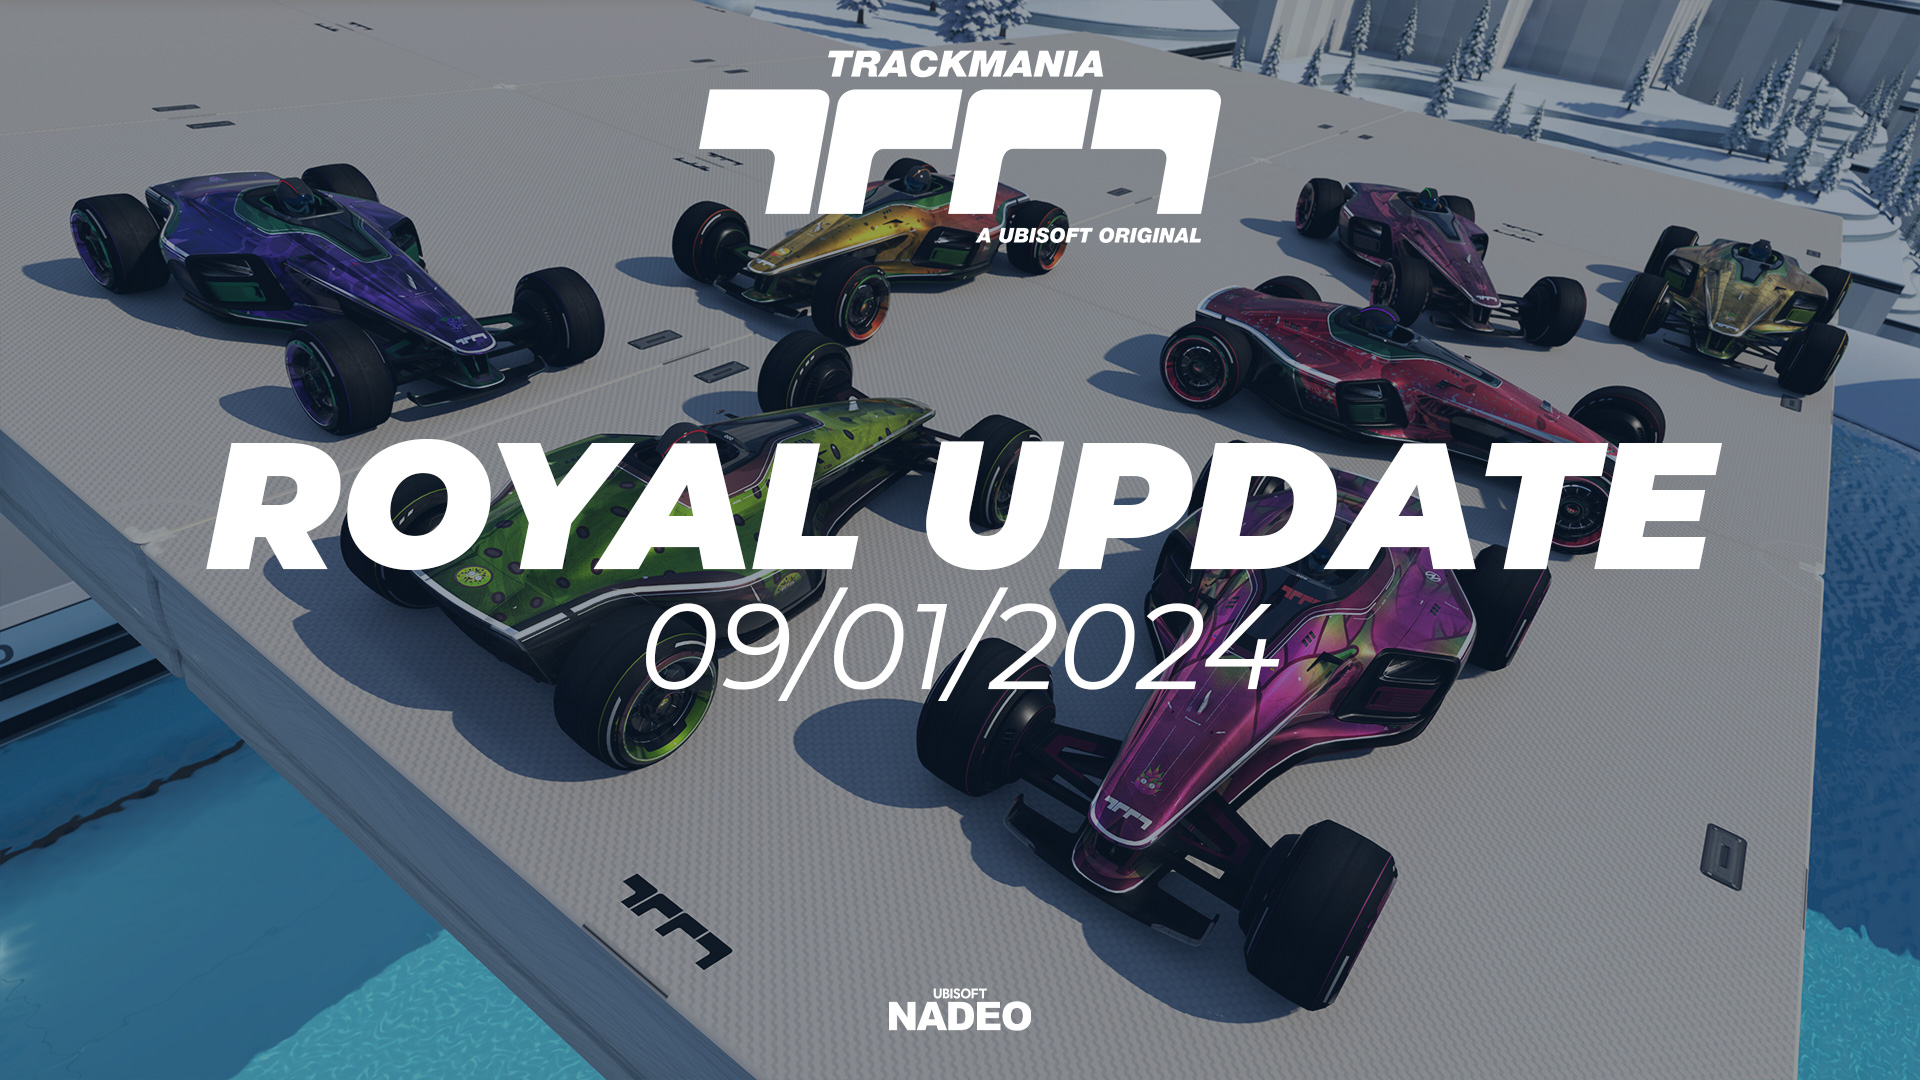 DISCOVER THE NEW ROYAL UPDATE! - Trackmania